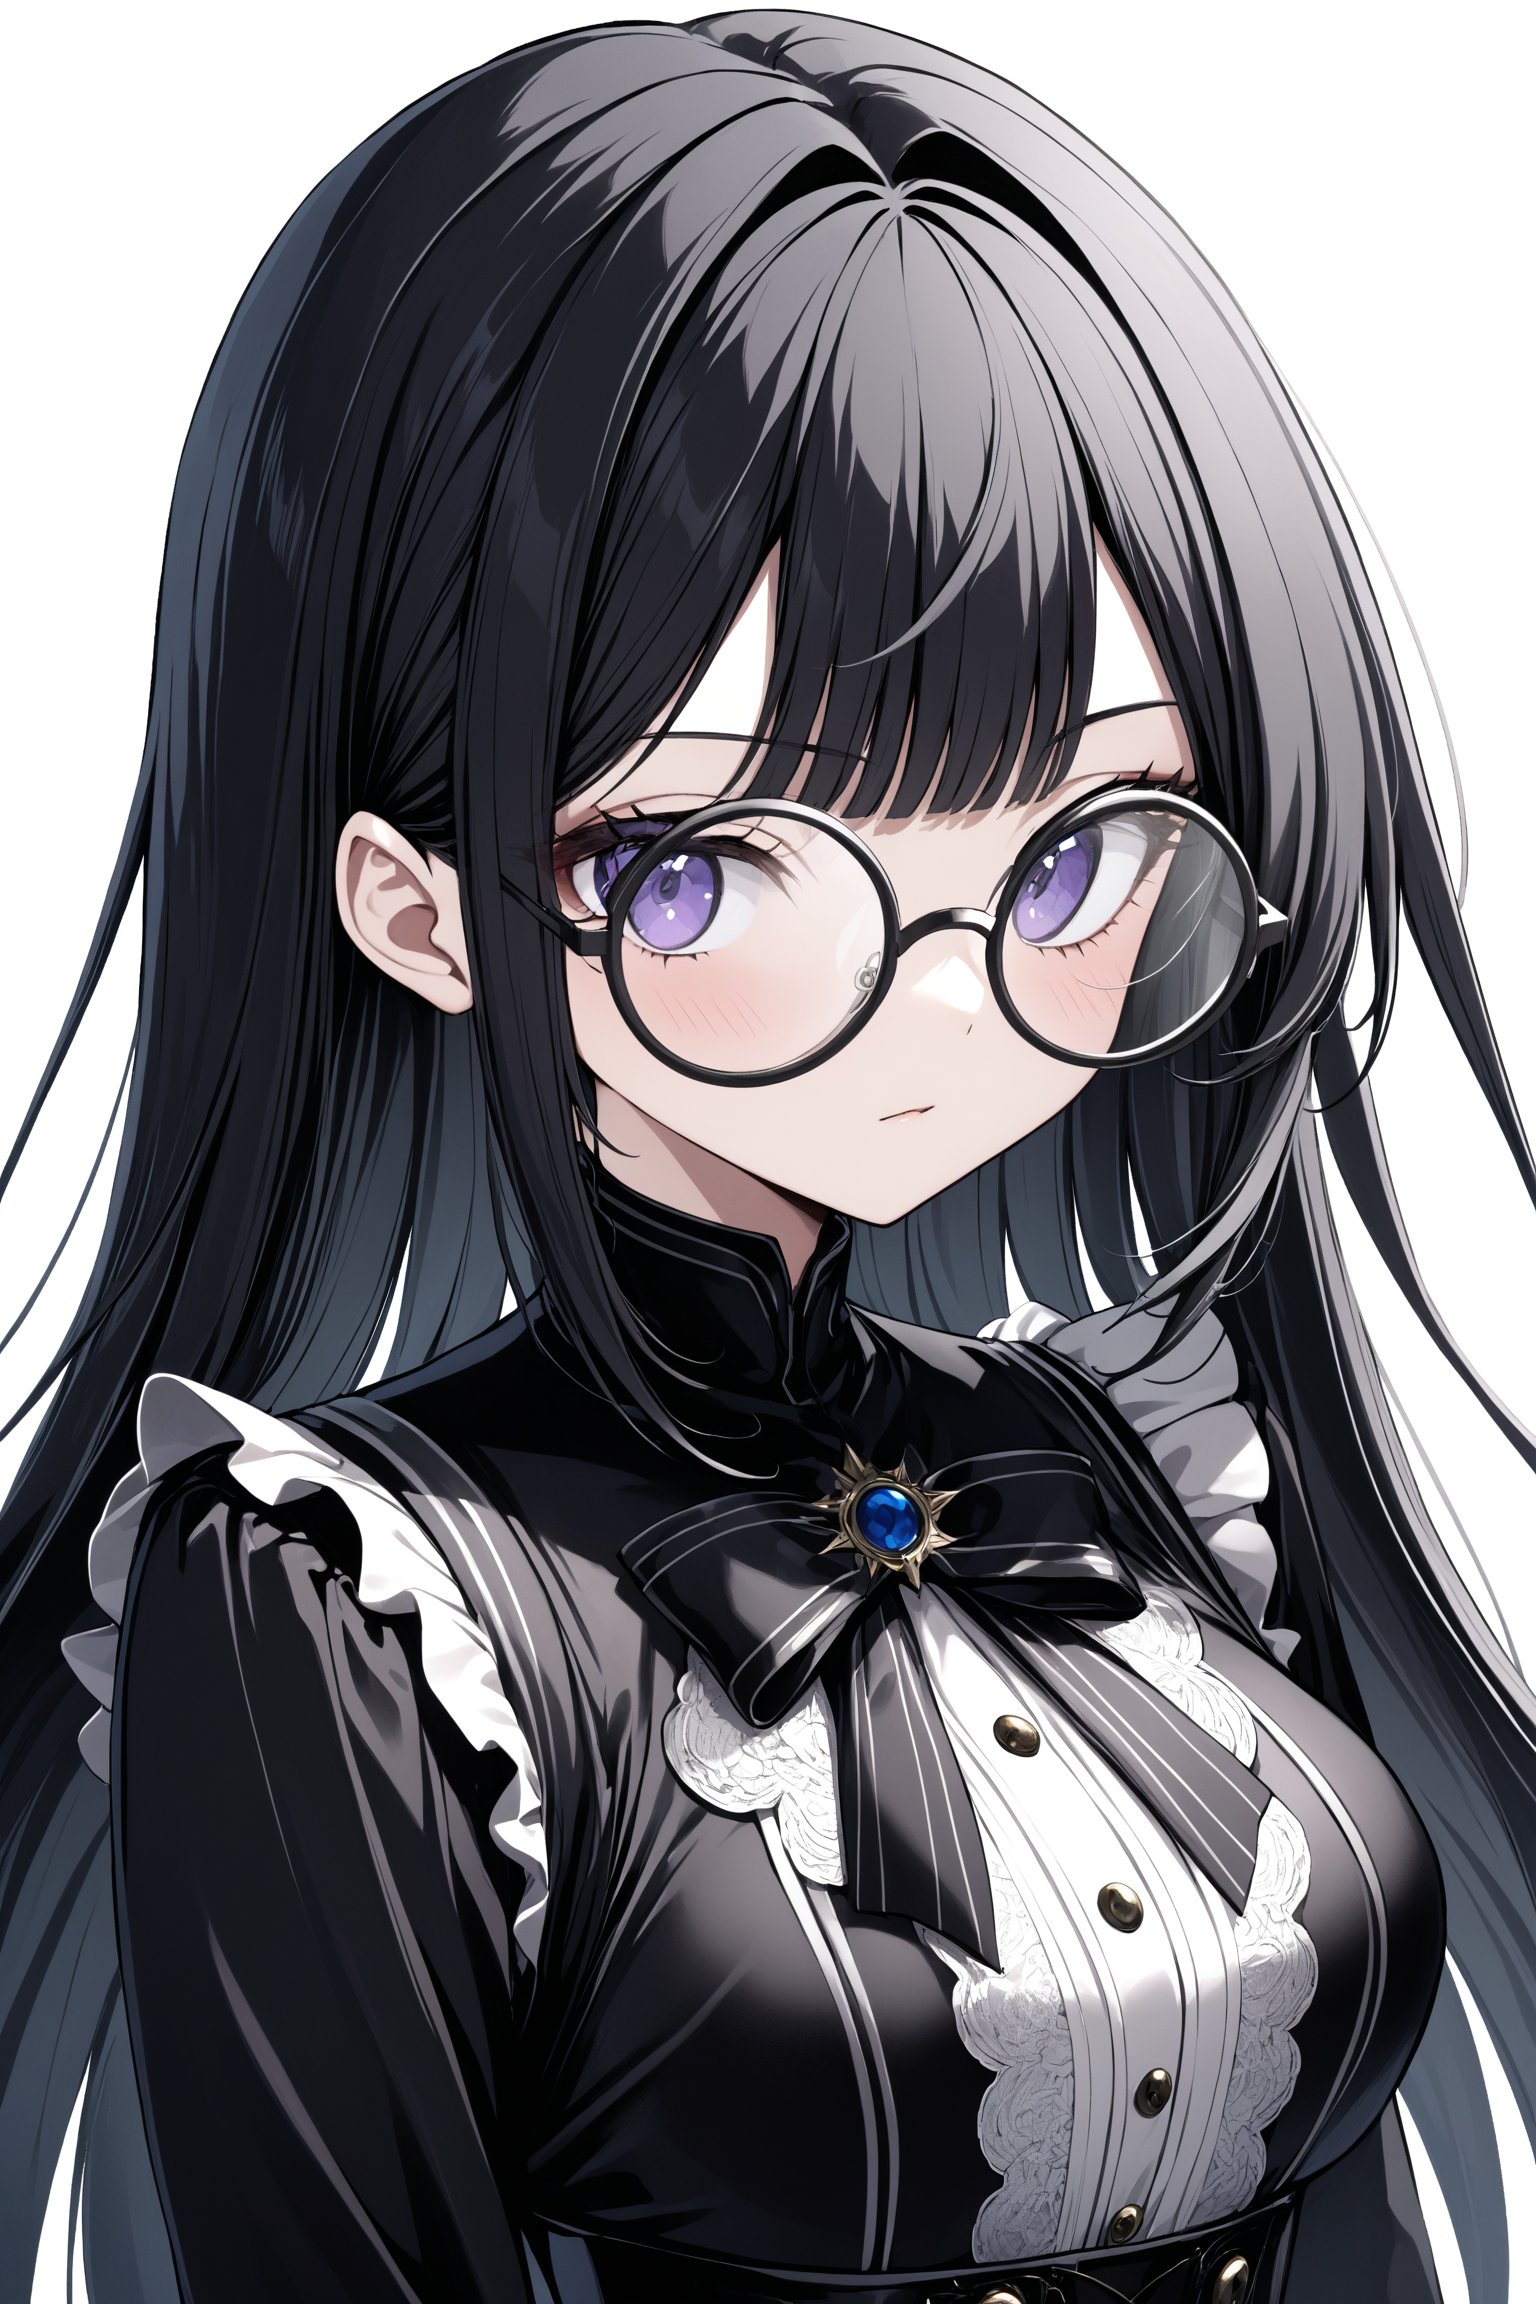 1 girl, black hair, hime cut,blunt bangs,(hair intakes),
 ((wearing large round glasses)), and a Gothic-style sailor uniform,The uniform features dark colors, lace accents, and a corset-like bodice, blending traditional and alternative fashion elements. Her look is both elegant and edgy,akebi komichi,anime